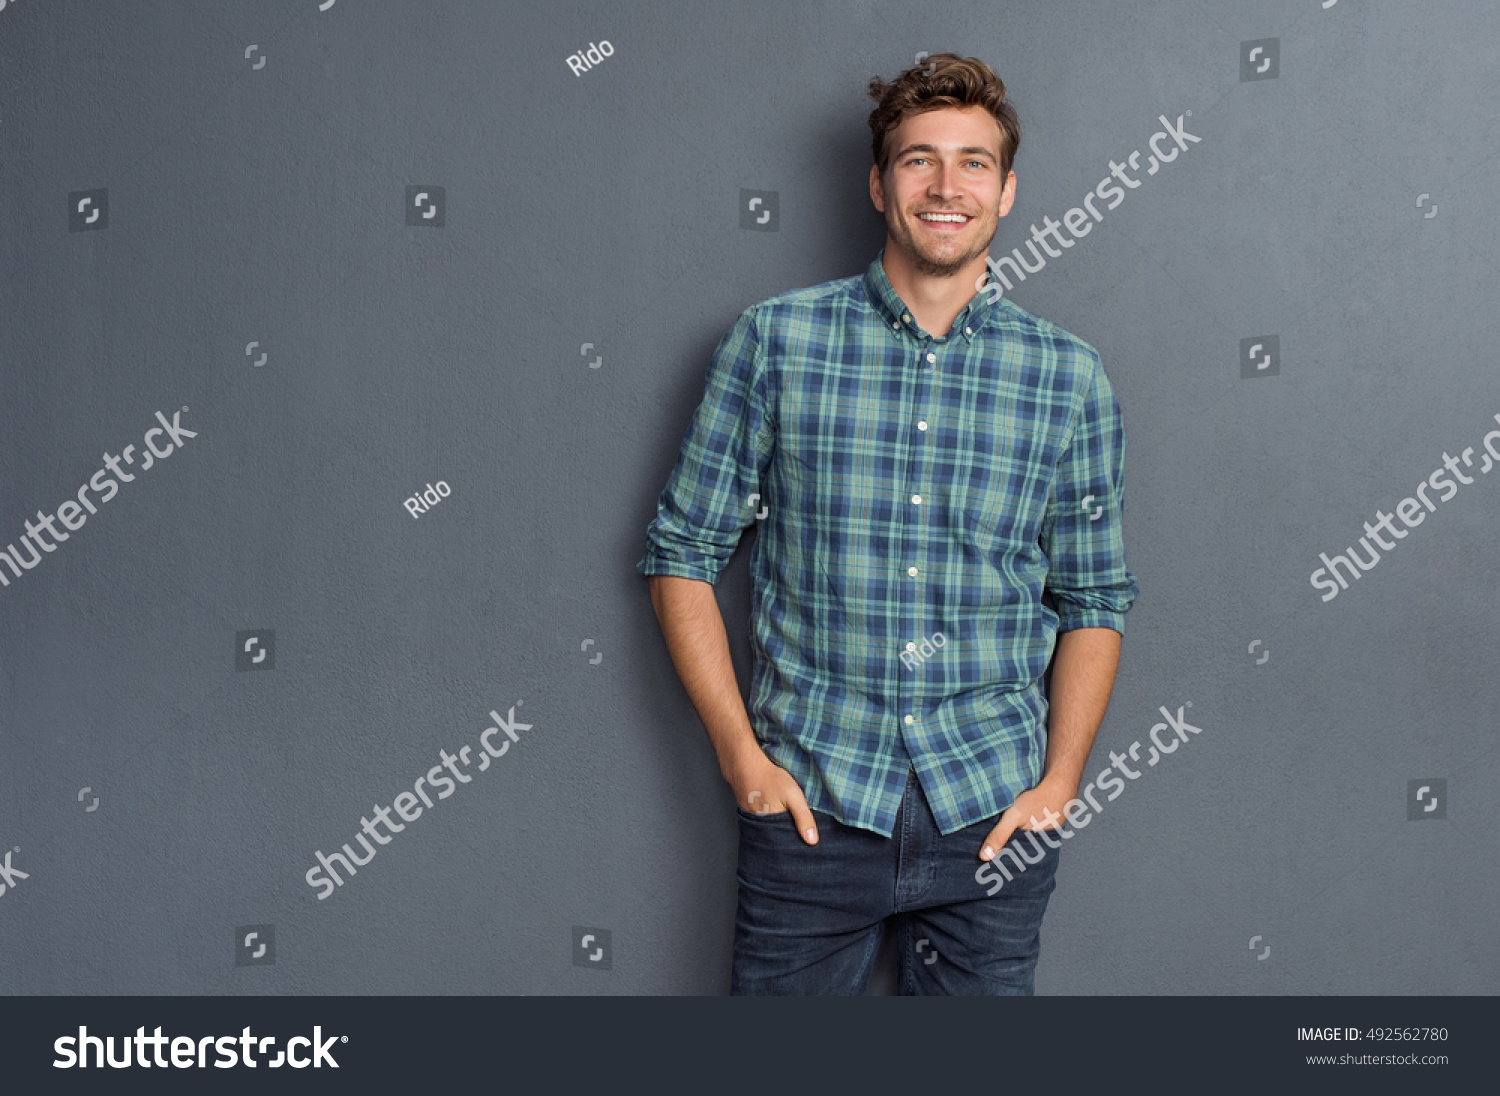 Handsome young man on grey background looking at camera. Portrait of laughing young man with hands in pockets leaning against grey wall. Happy guy smiling. #492562780